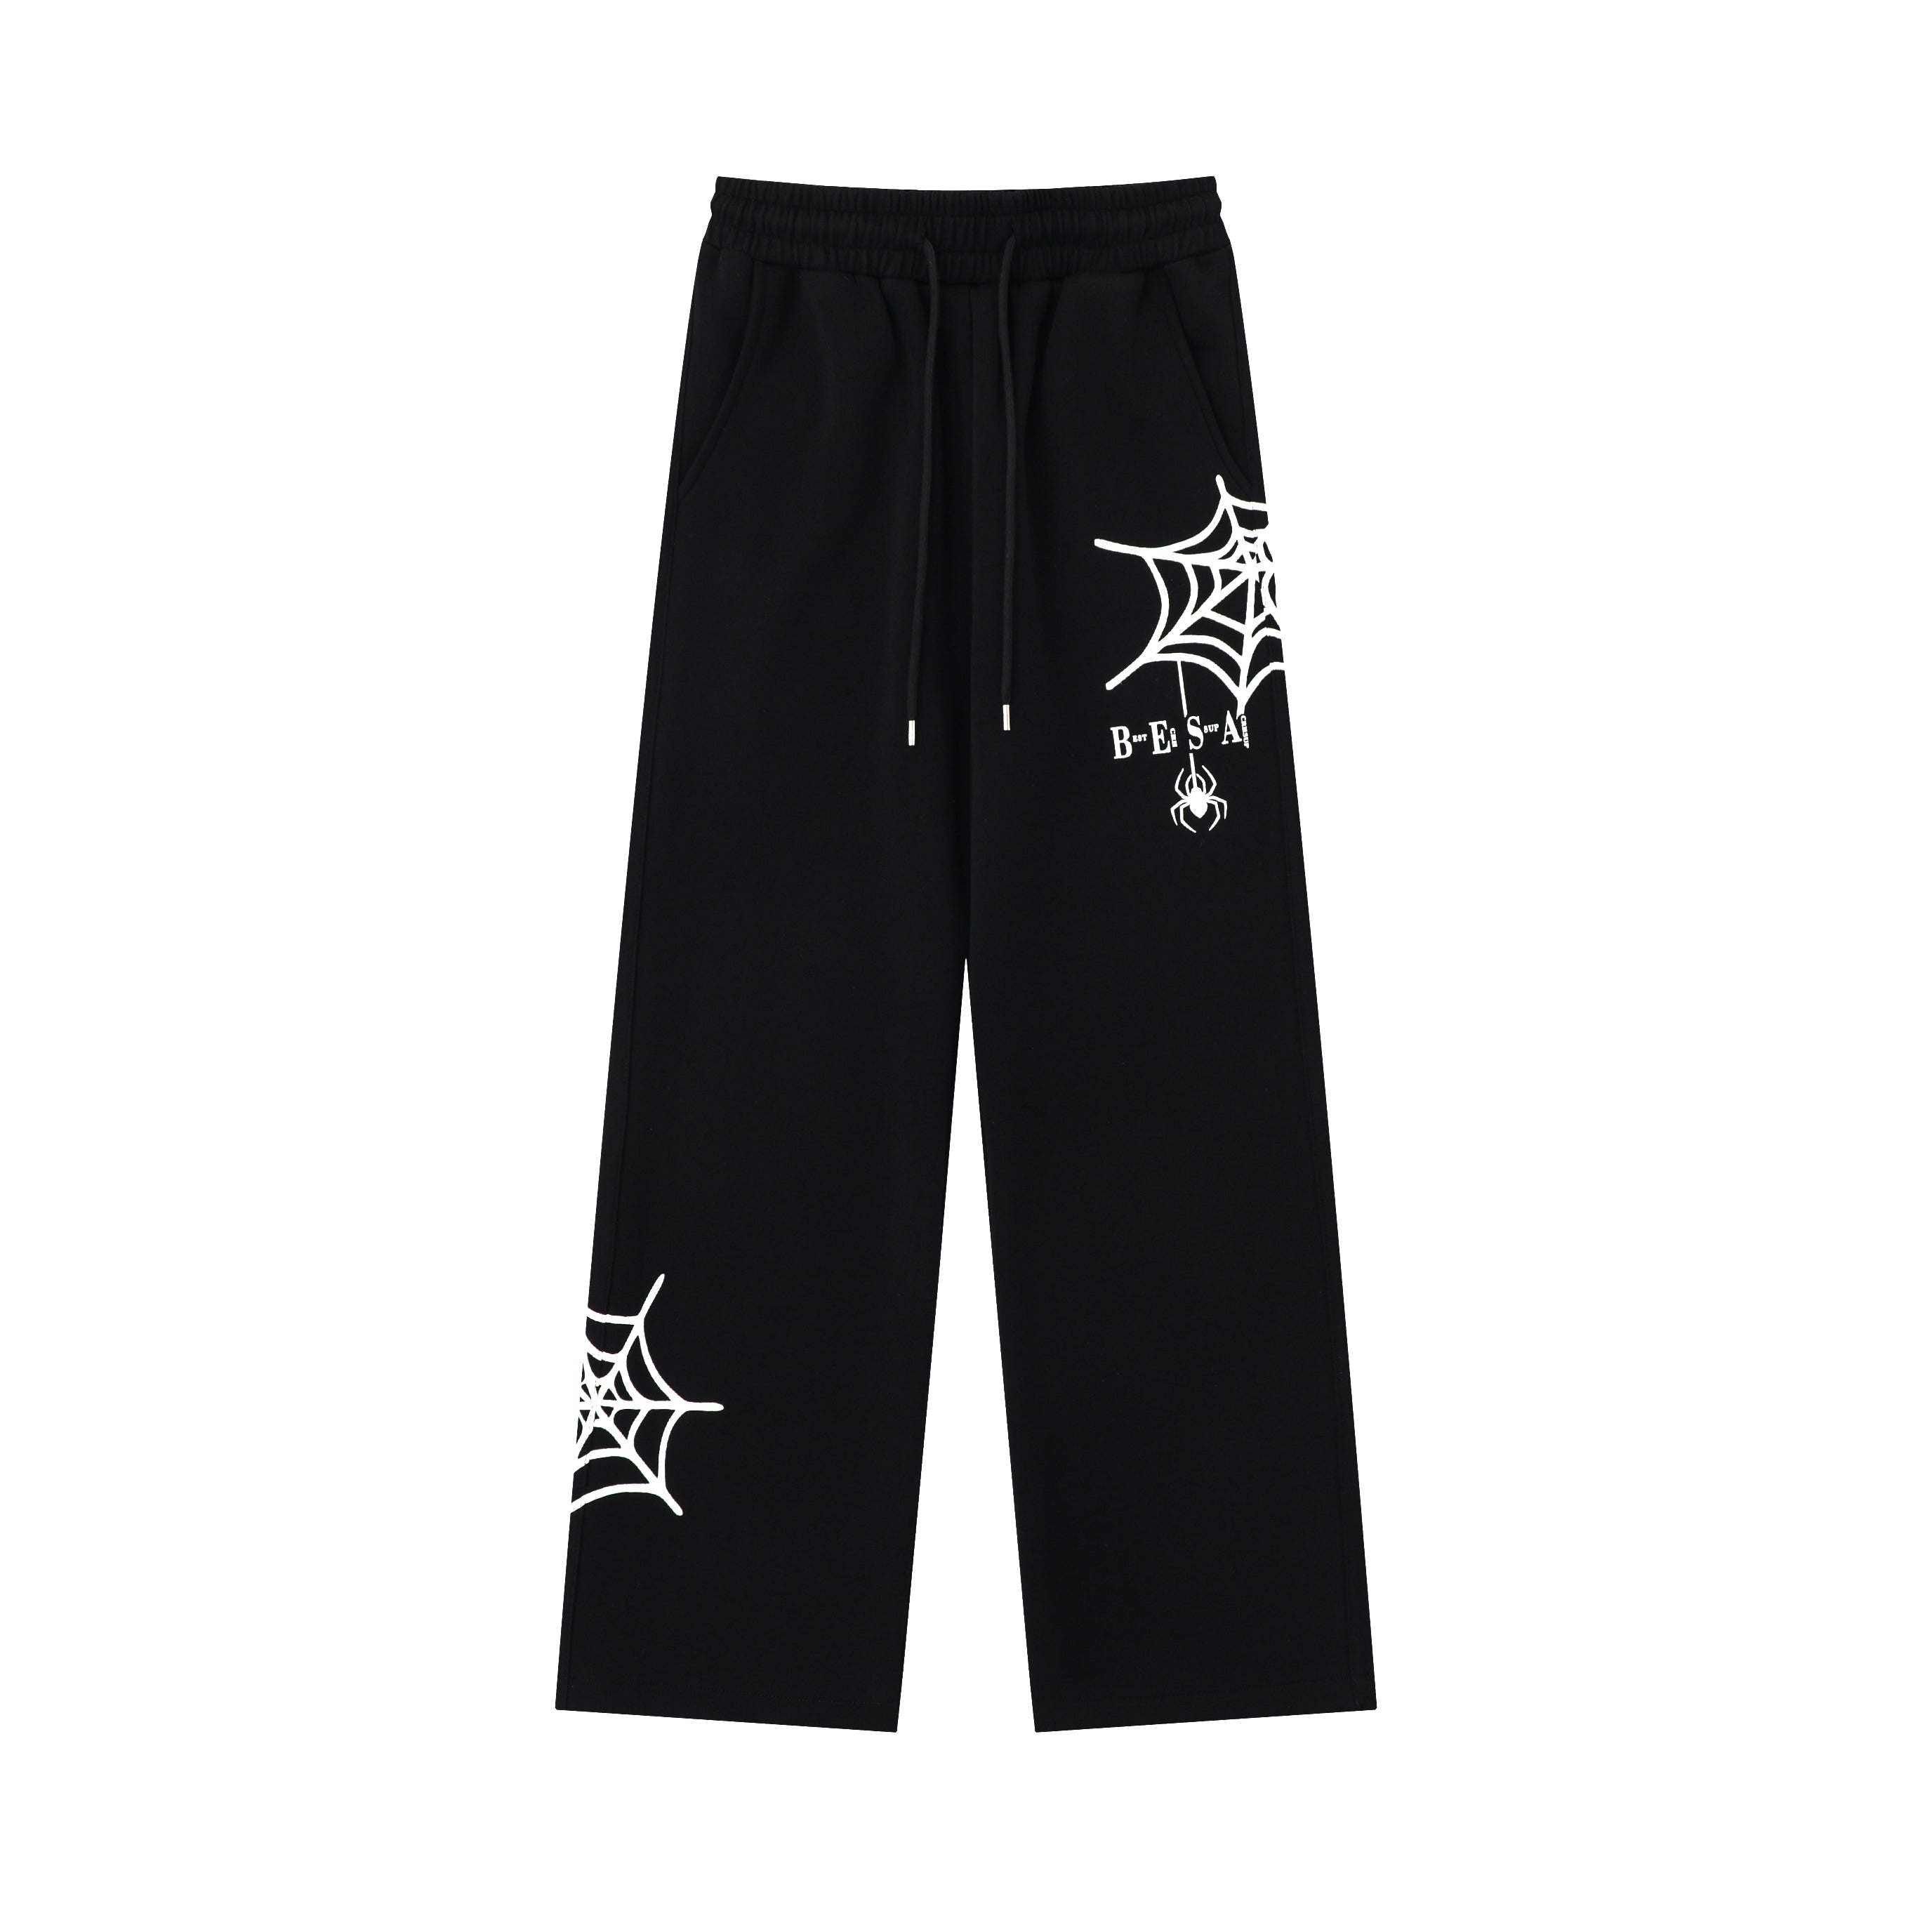 Faire Echo Spider patterned casual straight leg pants